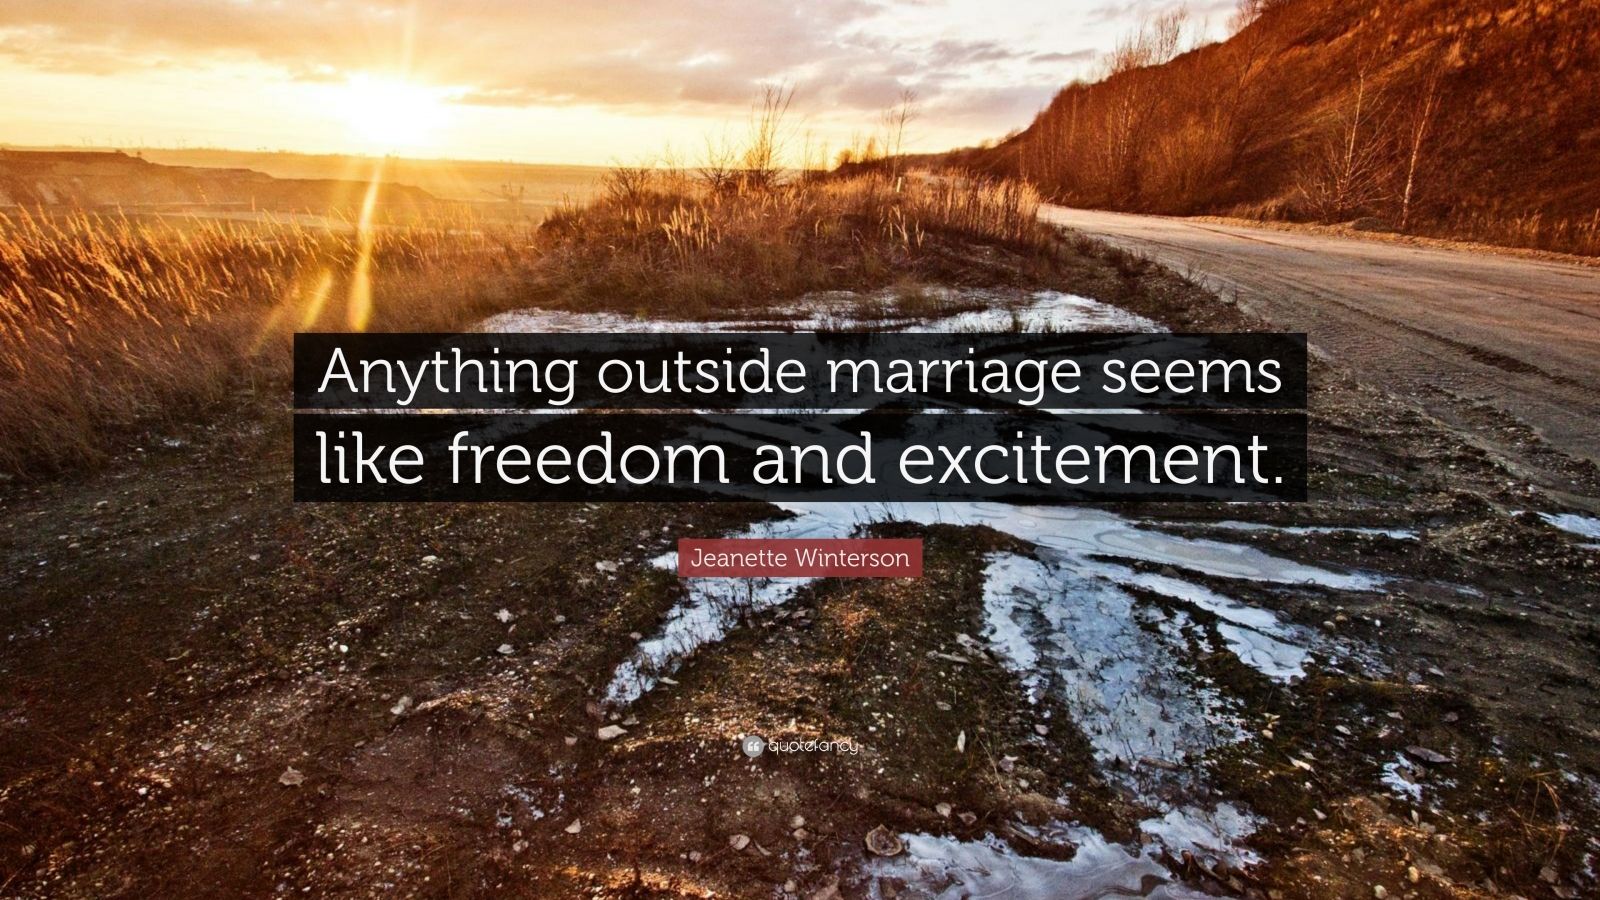 Jeanette Winterson Quote Anything Outside Marriage Seems Like Freedom And Excitement